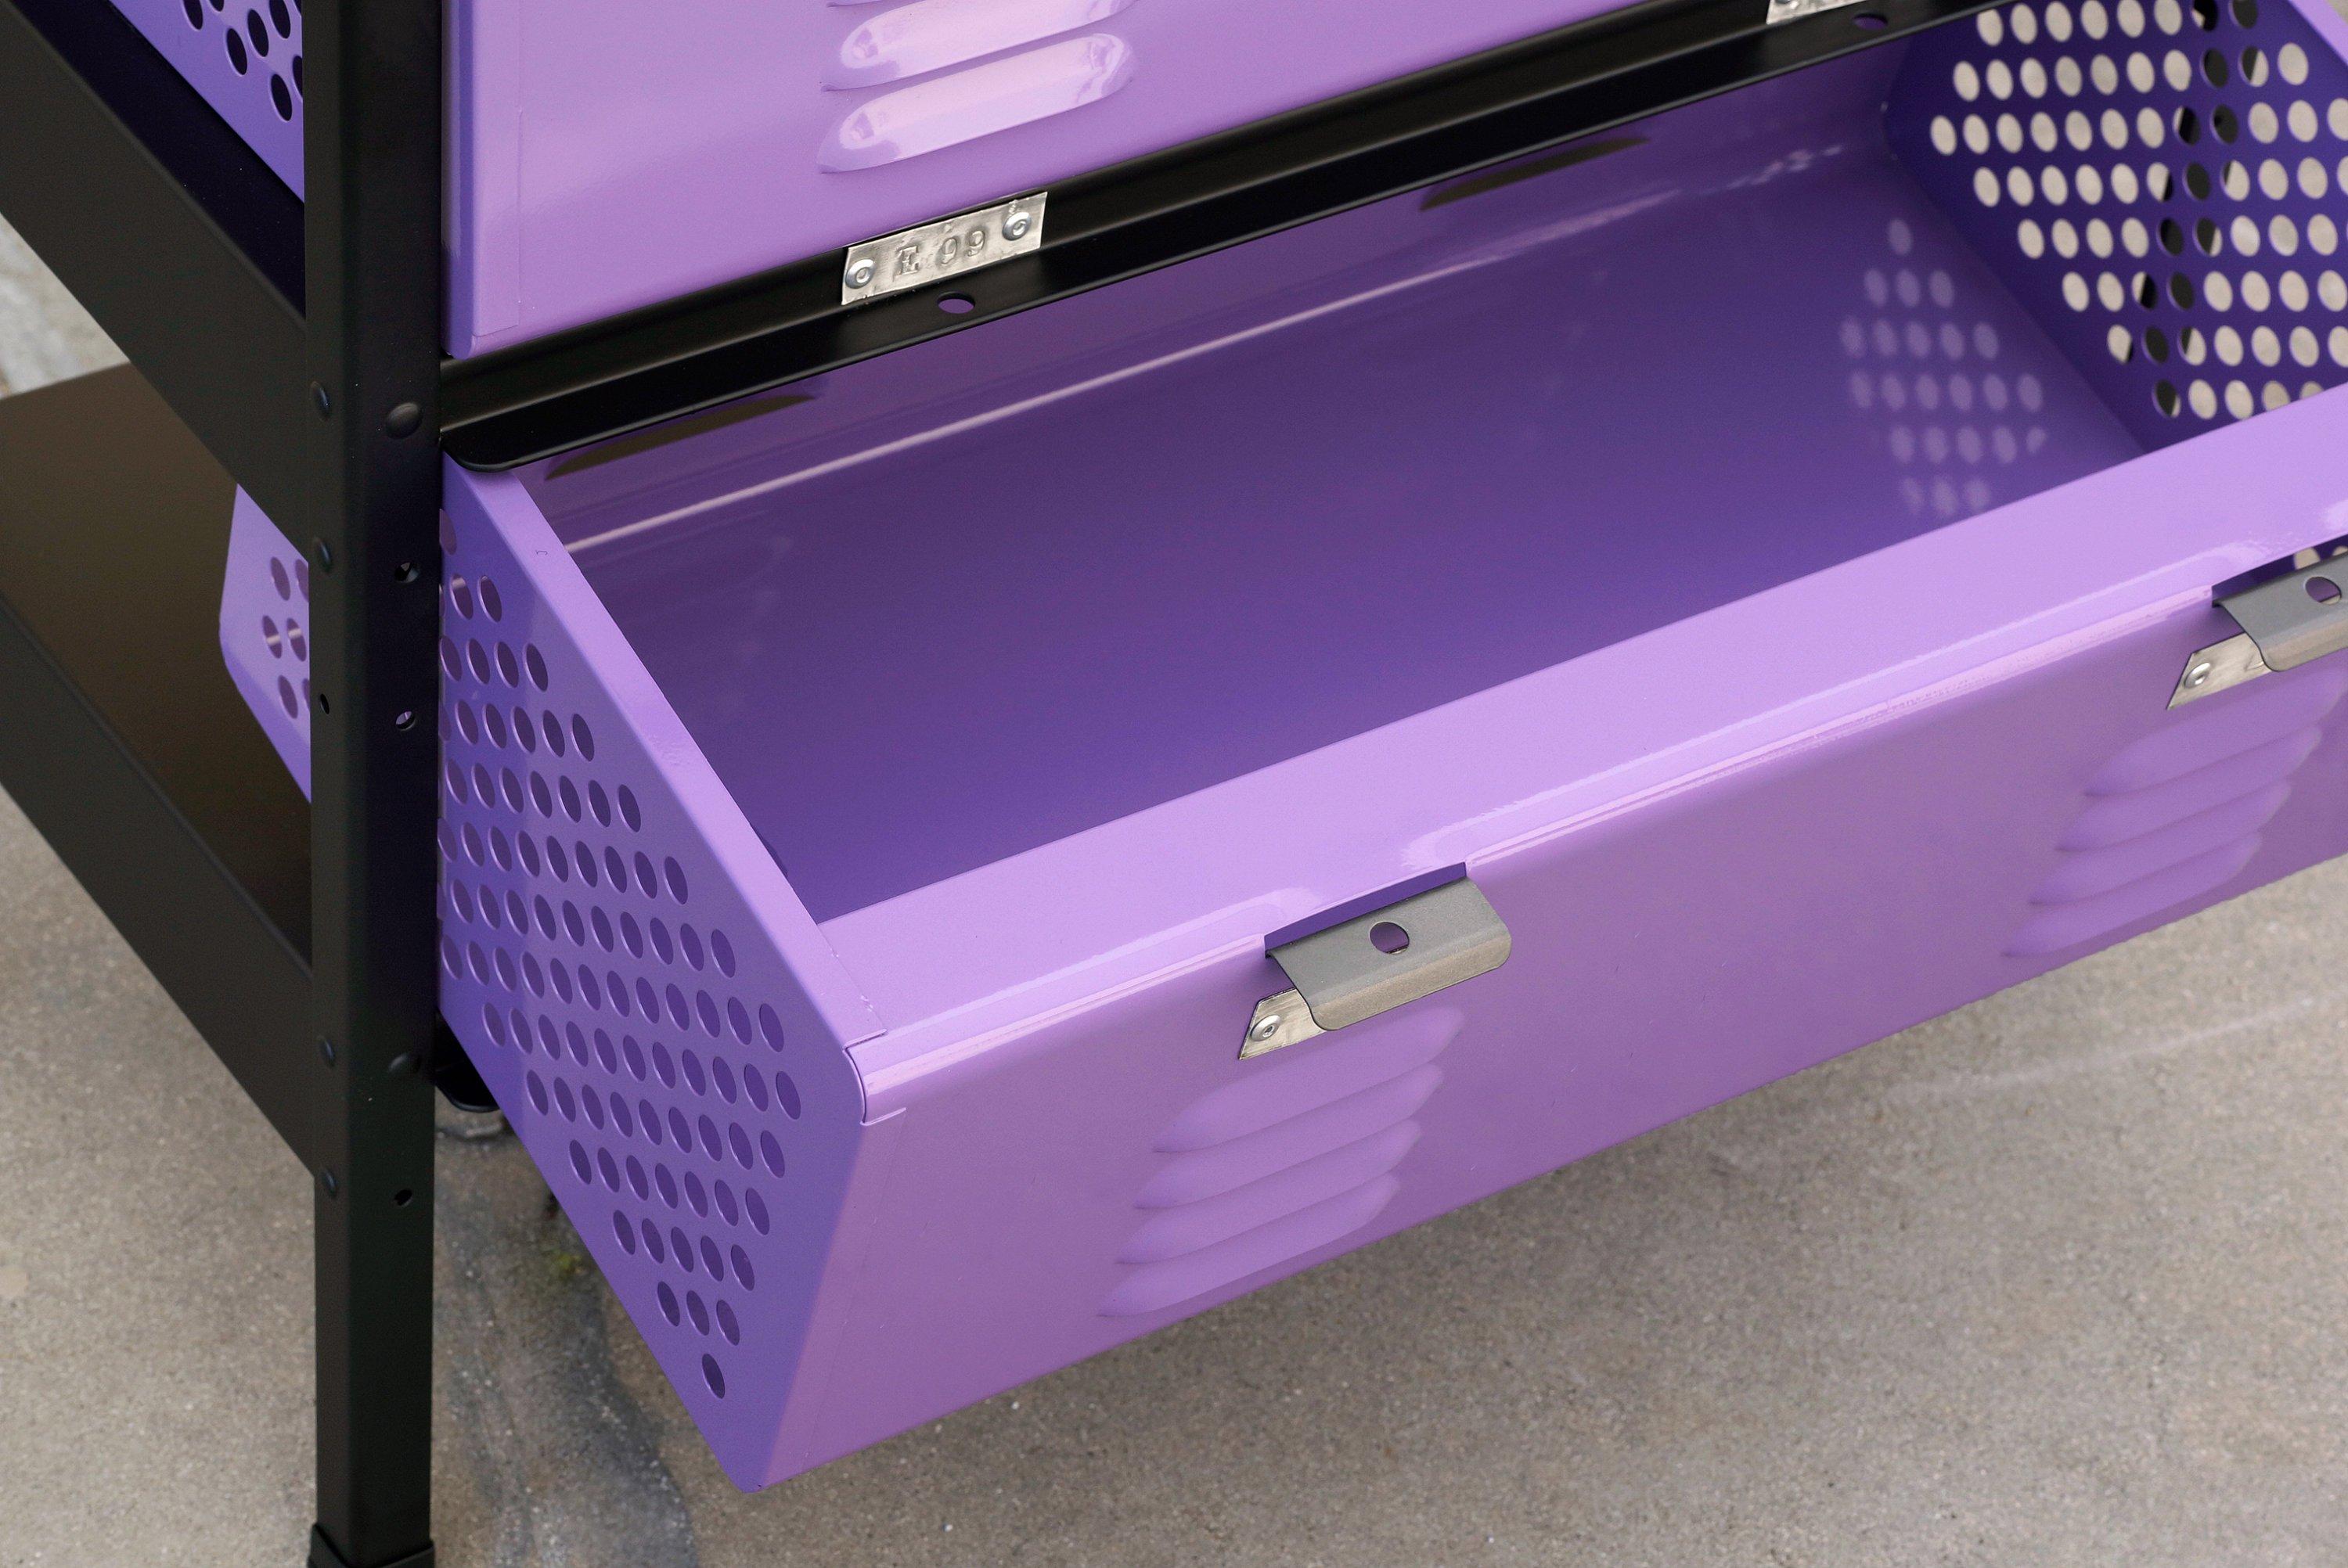 Mid-Century Modern 2 x 2 Locker Basket Unit in Lilac, Vintage Inspired/ Newly Fabricated to Order For Sale